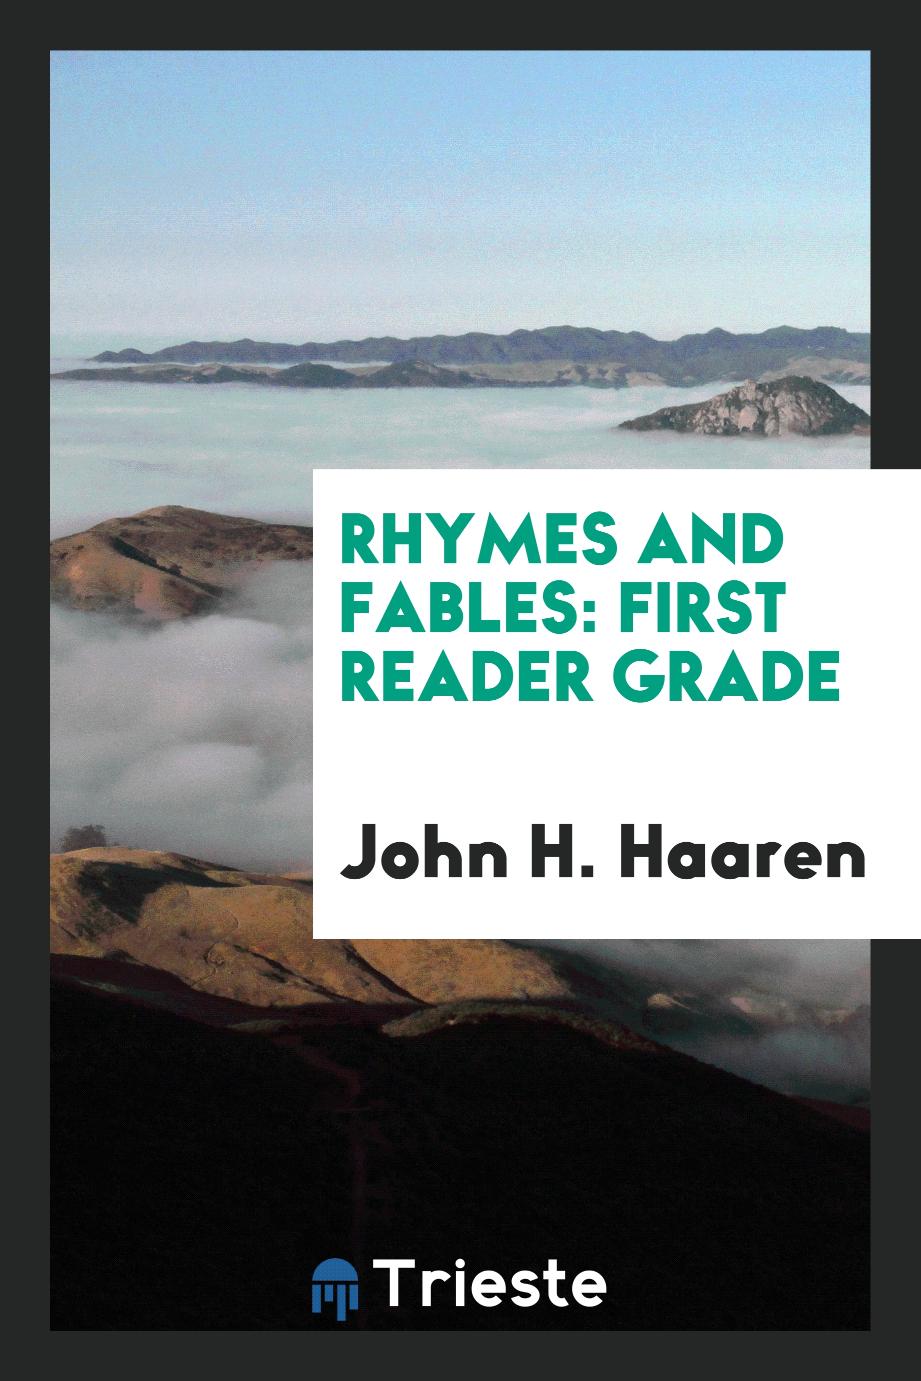 Rhymes and Fables: First Reader Grade